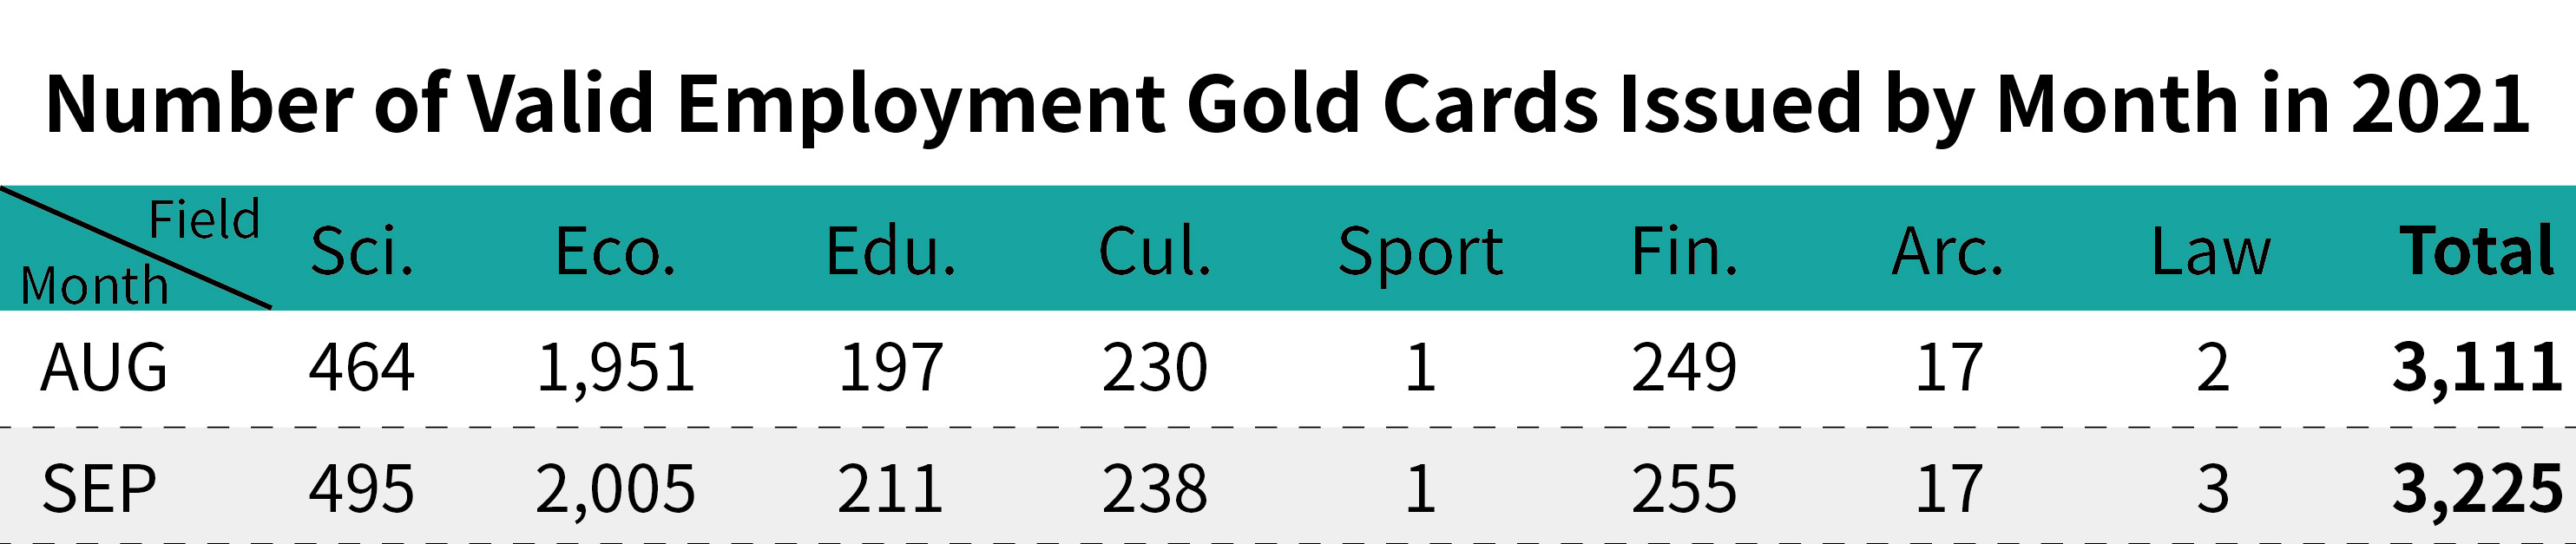 Number of Valid Employment Gold Cards Issued by Month-September